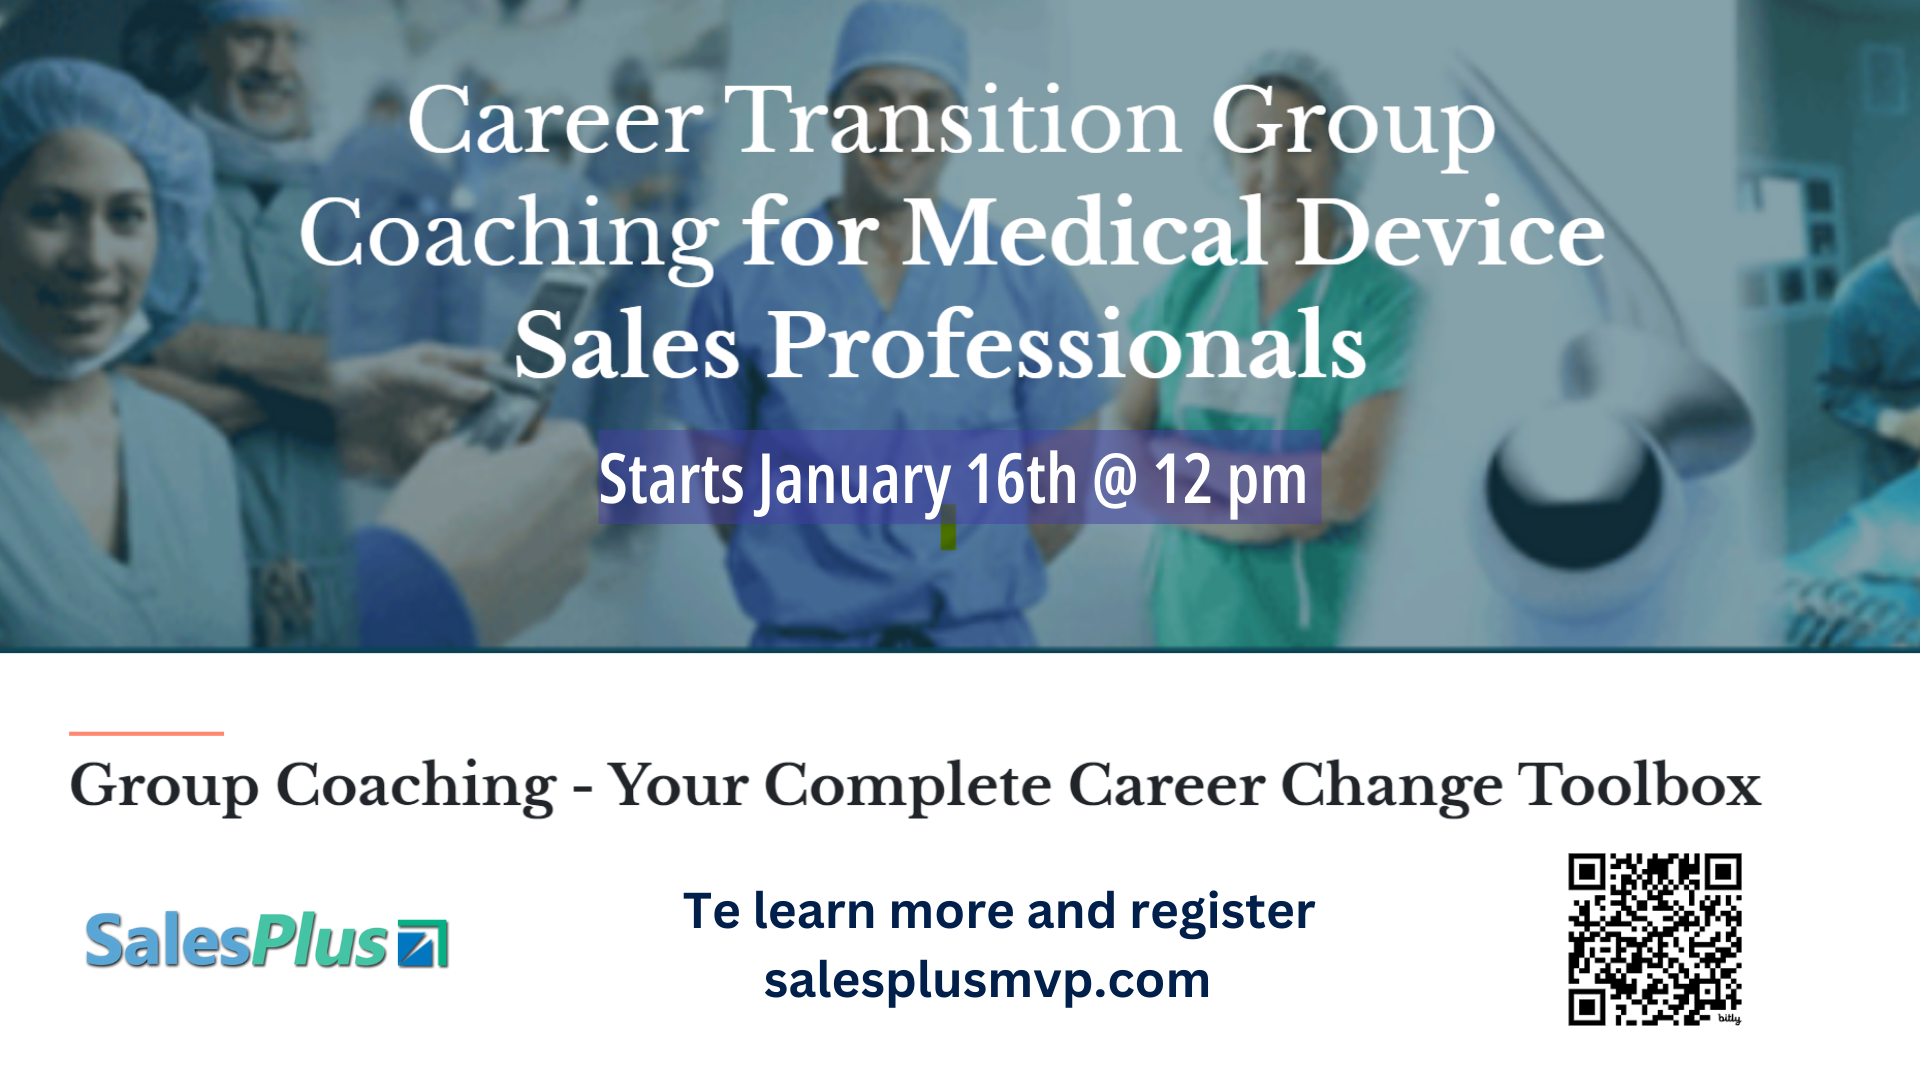 Career Transition Group Coaching for Medical Device Sales Professionals